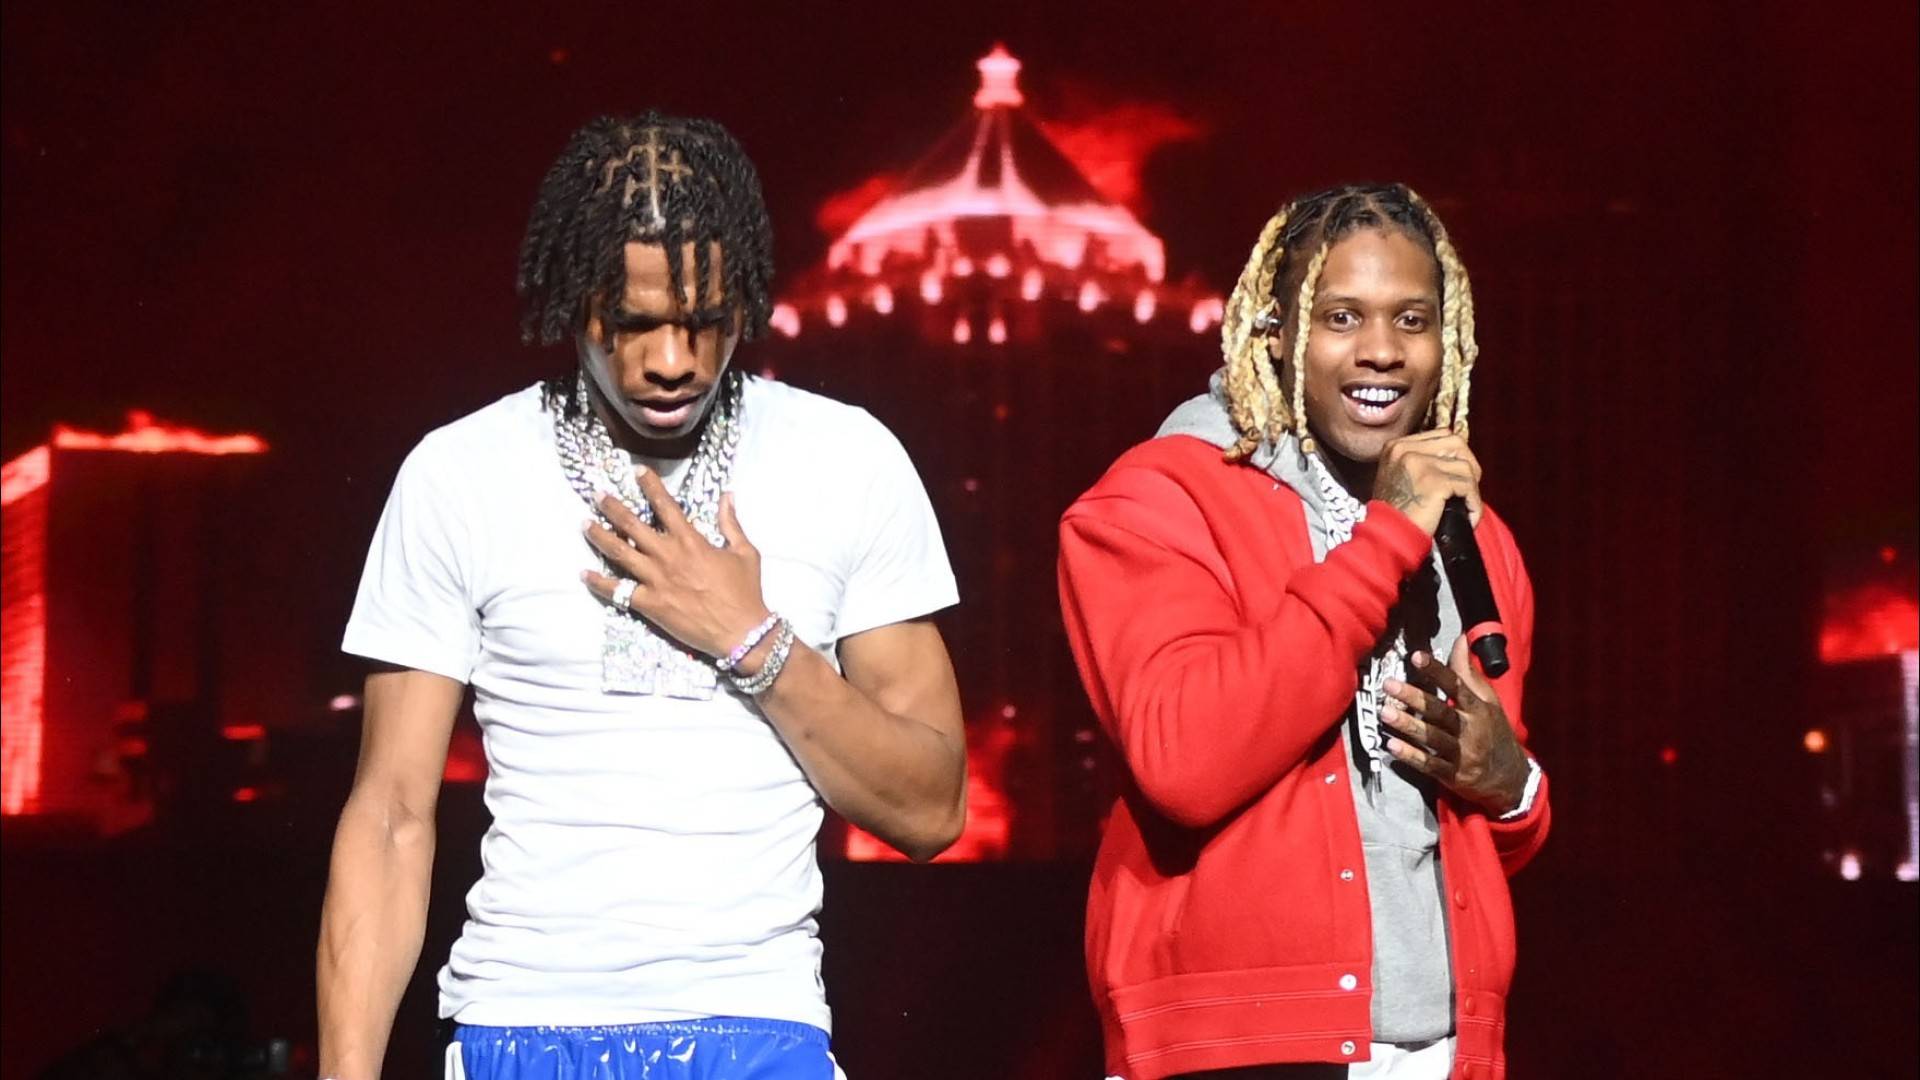 BET Awards 2022 'The Art of the Come Up' Lil Baby and Lil Durk